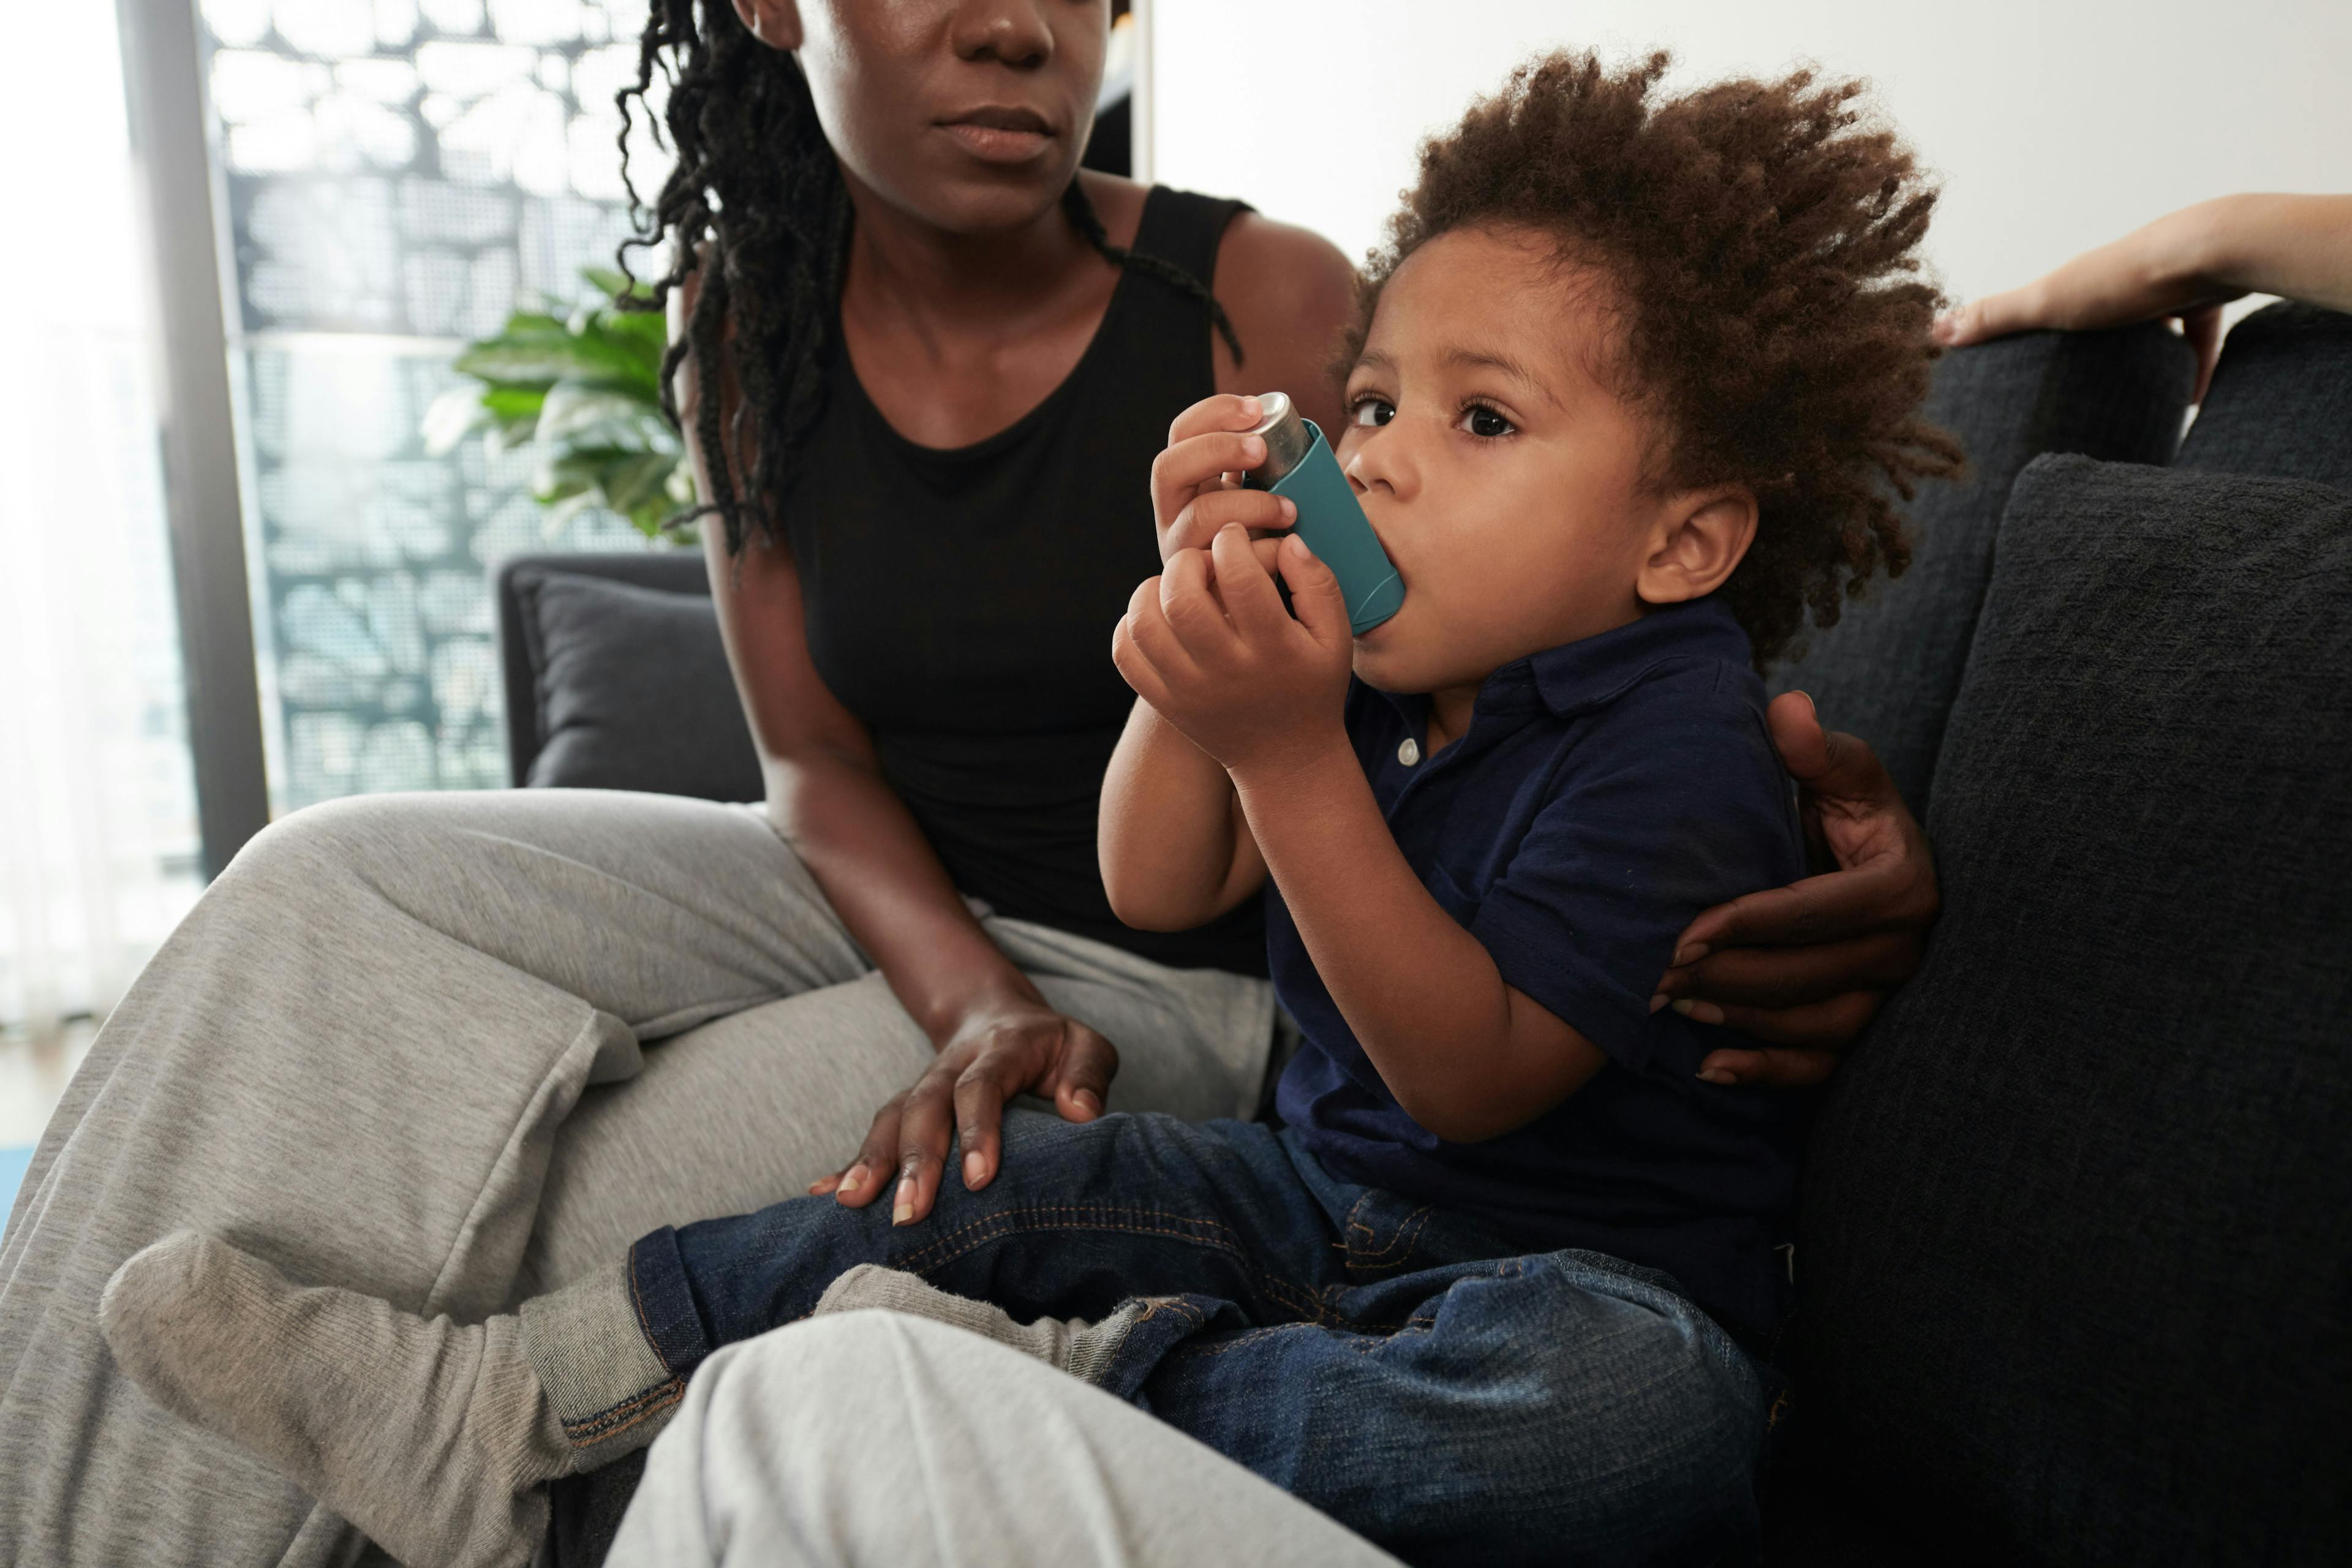 Worried mother looking at little son holding inhaler to treat asthmatic attack | DragonImages - stock.adobe.com